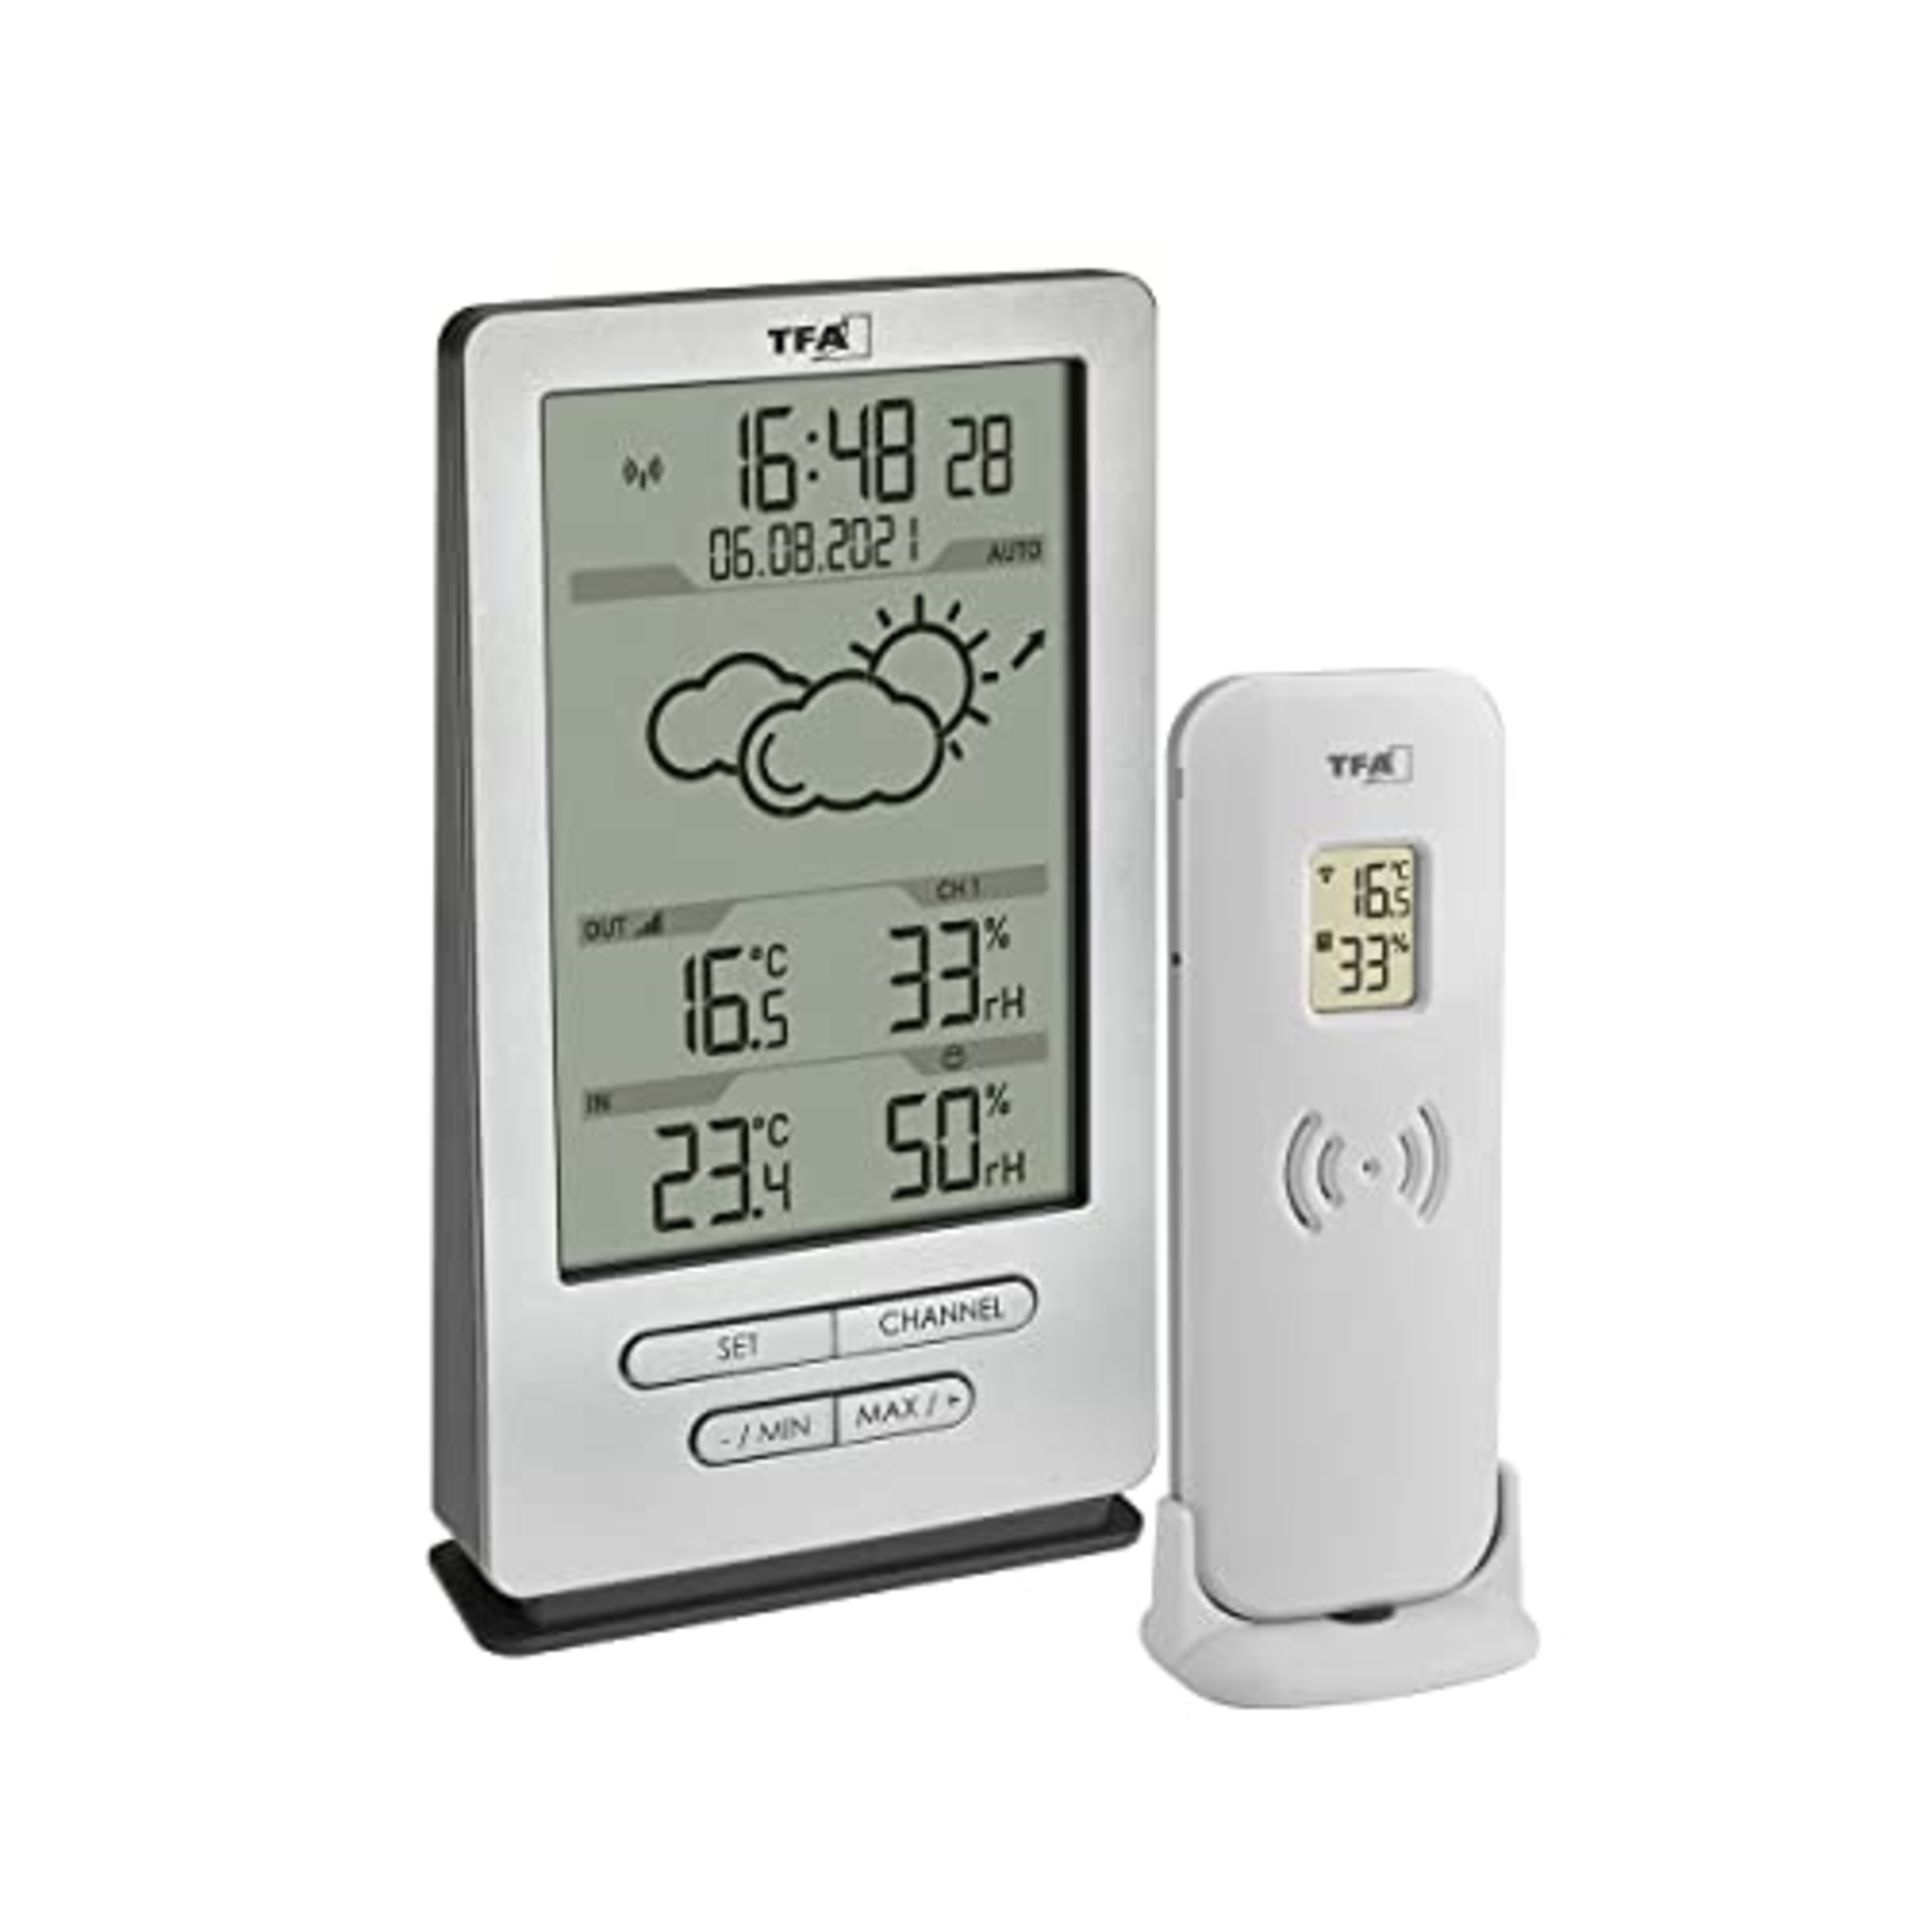 [NEW] TFA Dostmann Wireless Weather Station Xena, 35.1162.54, with outdoor sensor, ind